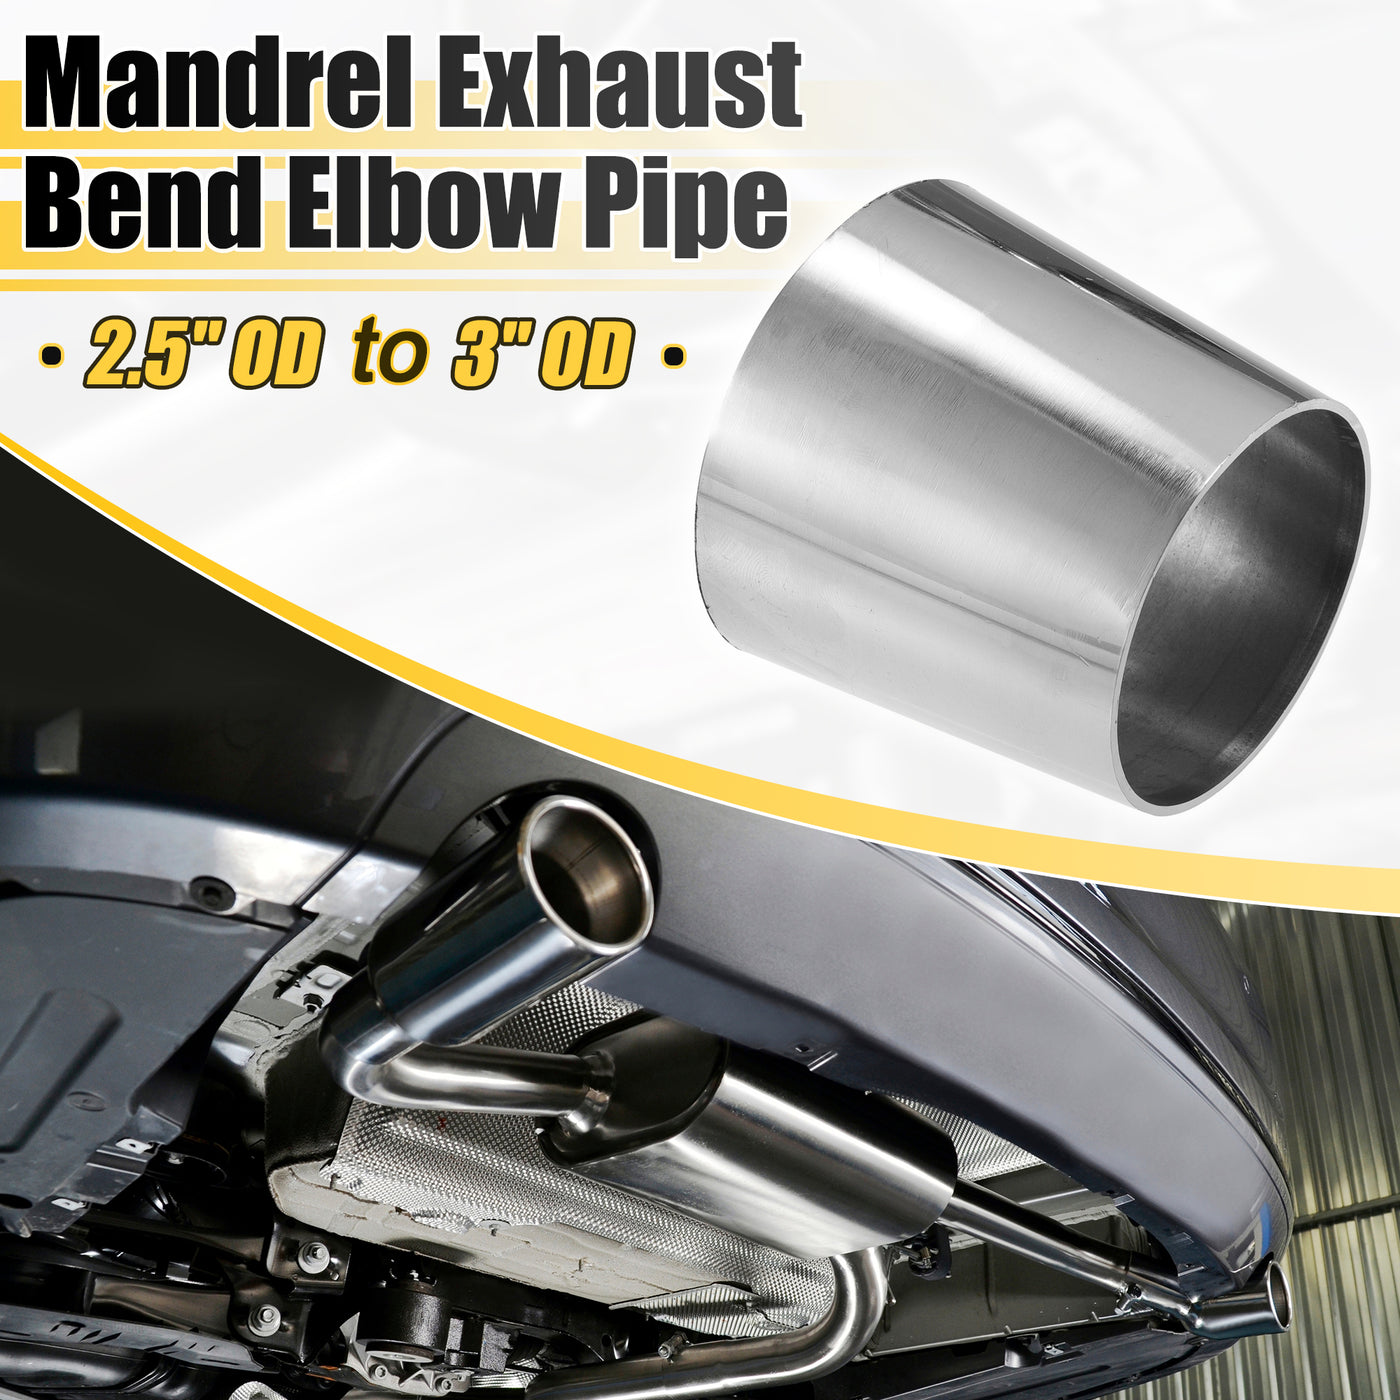 X AUTOHAUX Car Mandrel Exhaust Bend Elbow Pipe 304 Stainless Steel Concentric Reducer 1pcs